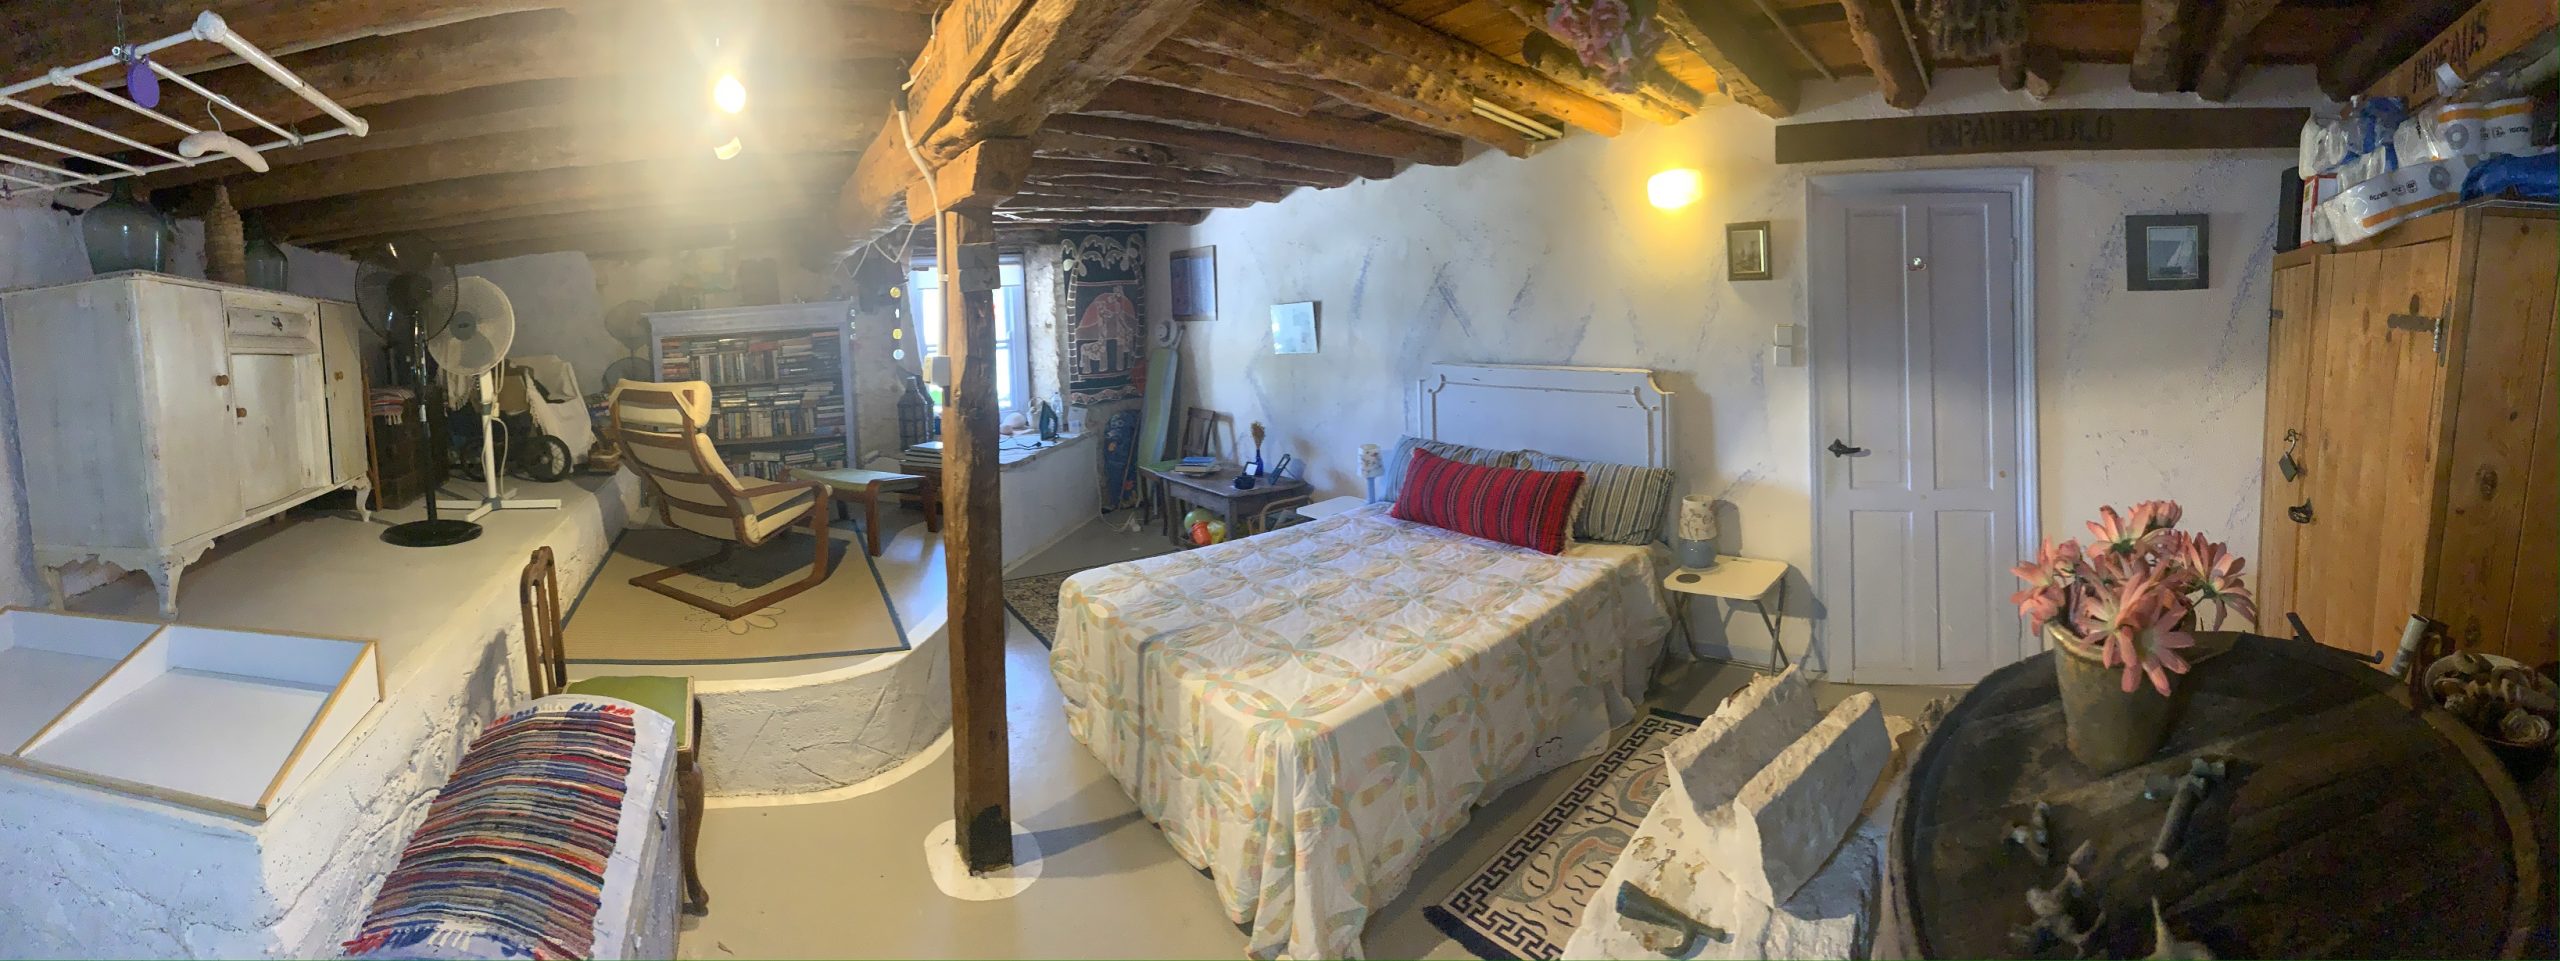 Bedroom of house for sale in Ithaca Greece, Lahos